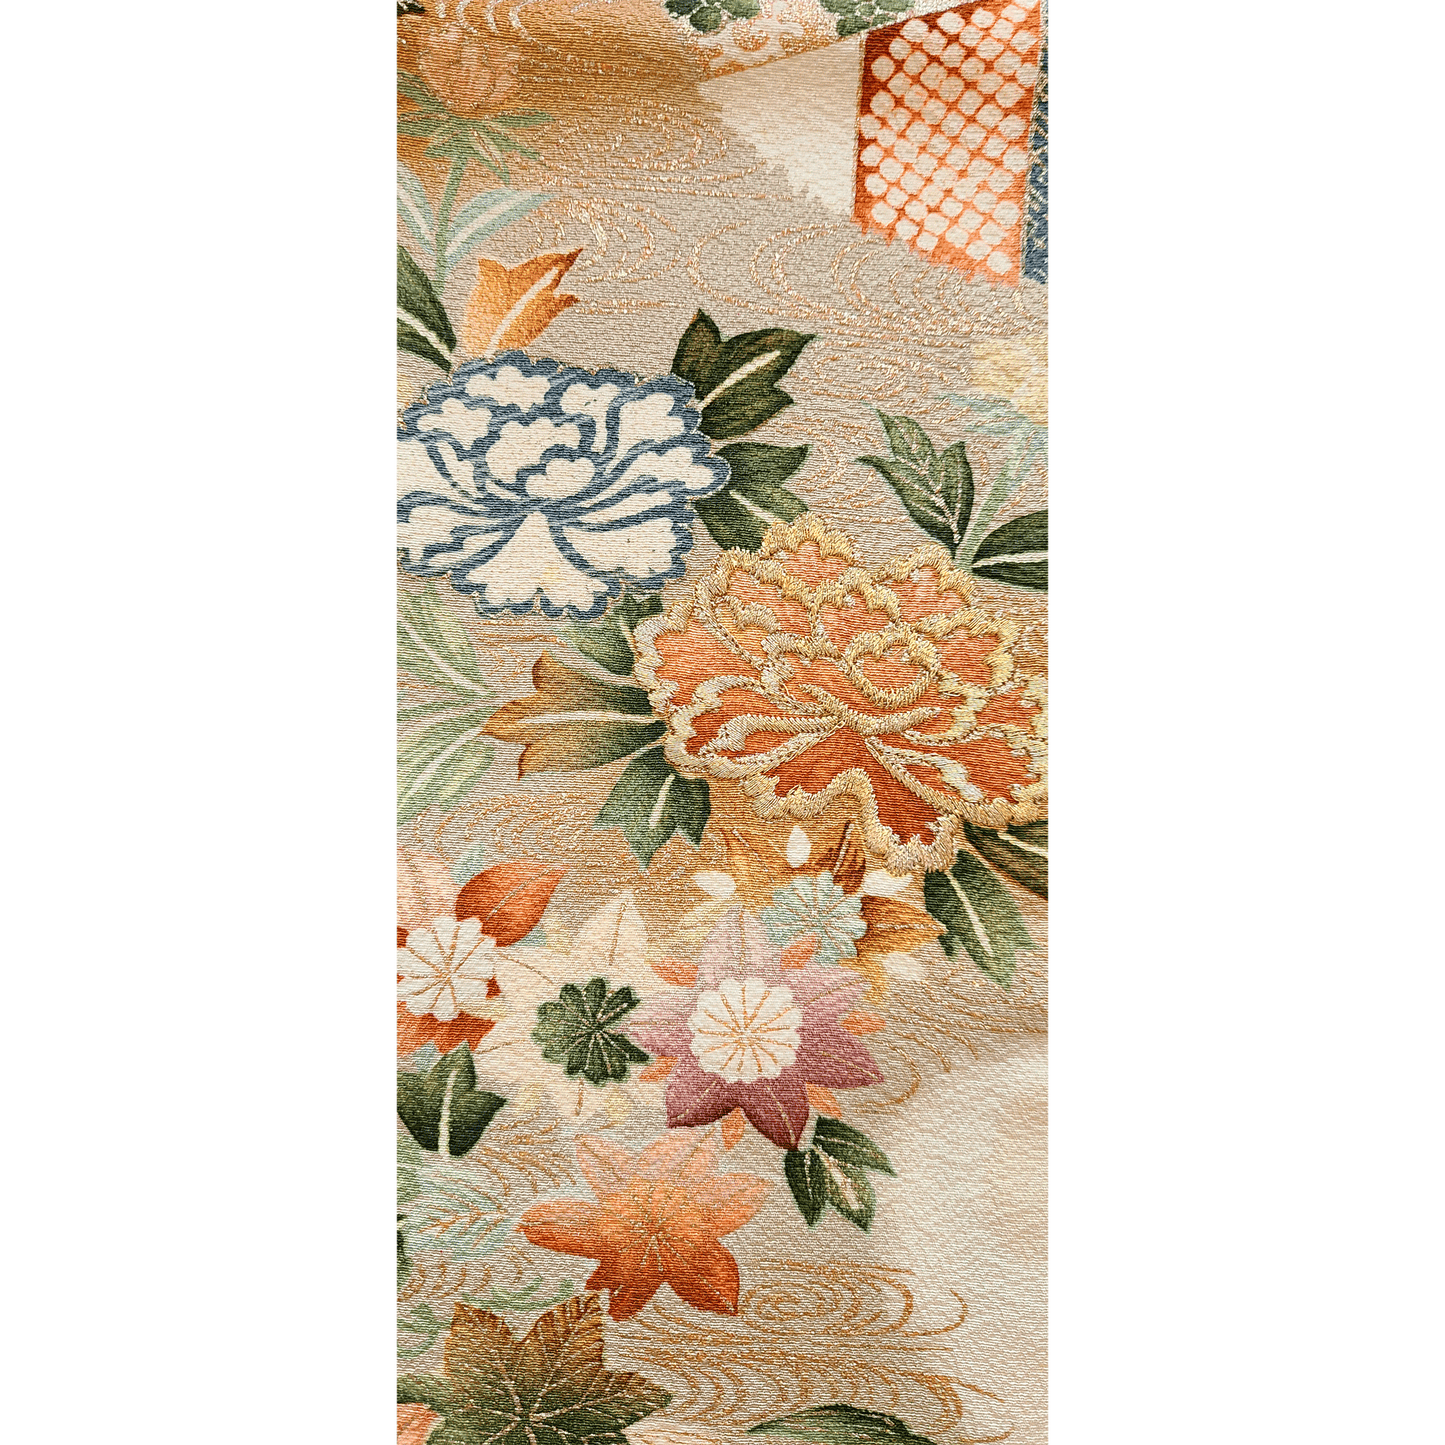 Fall Floral Reversible Silk Scarf